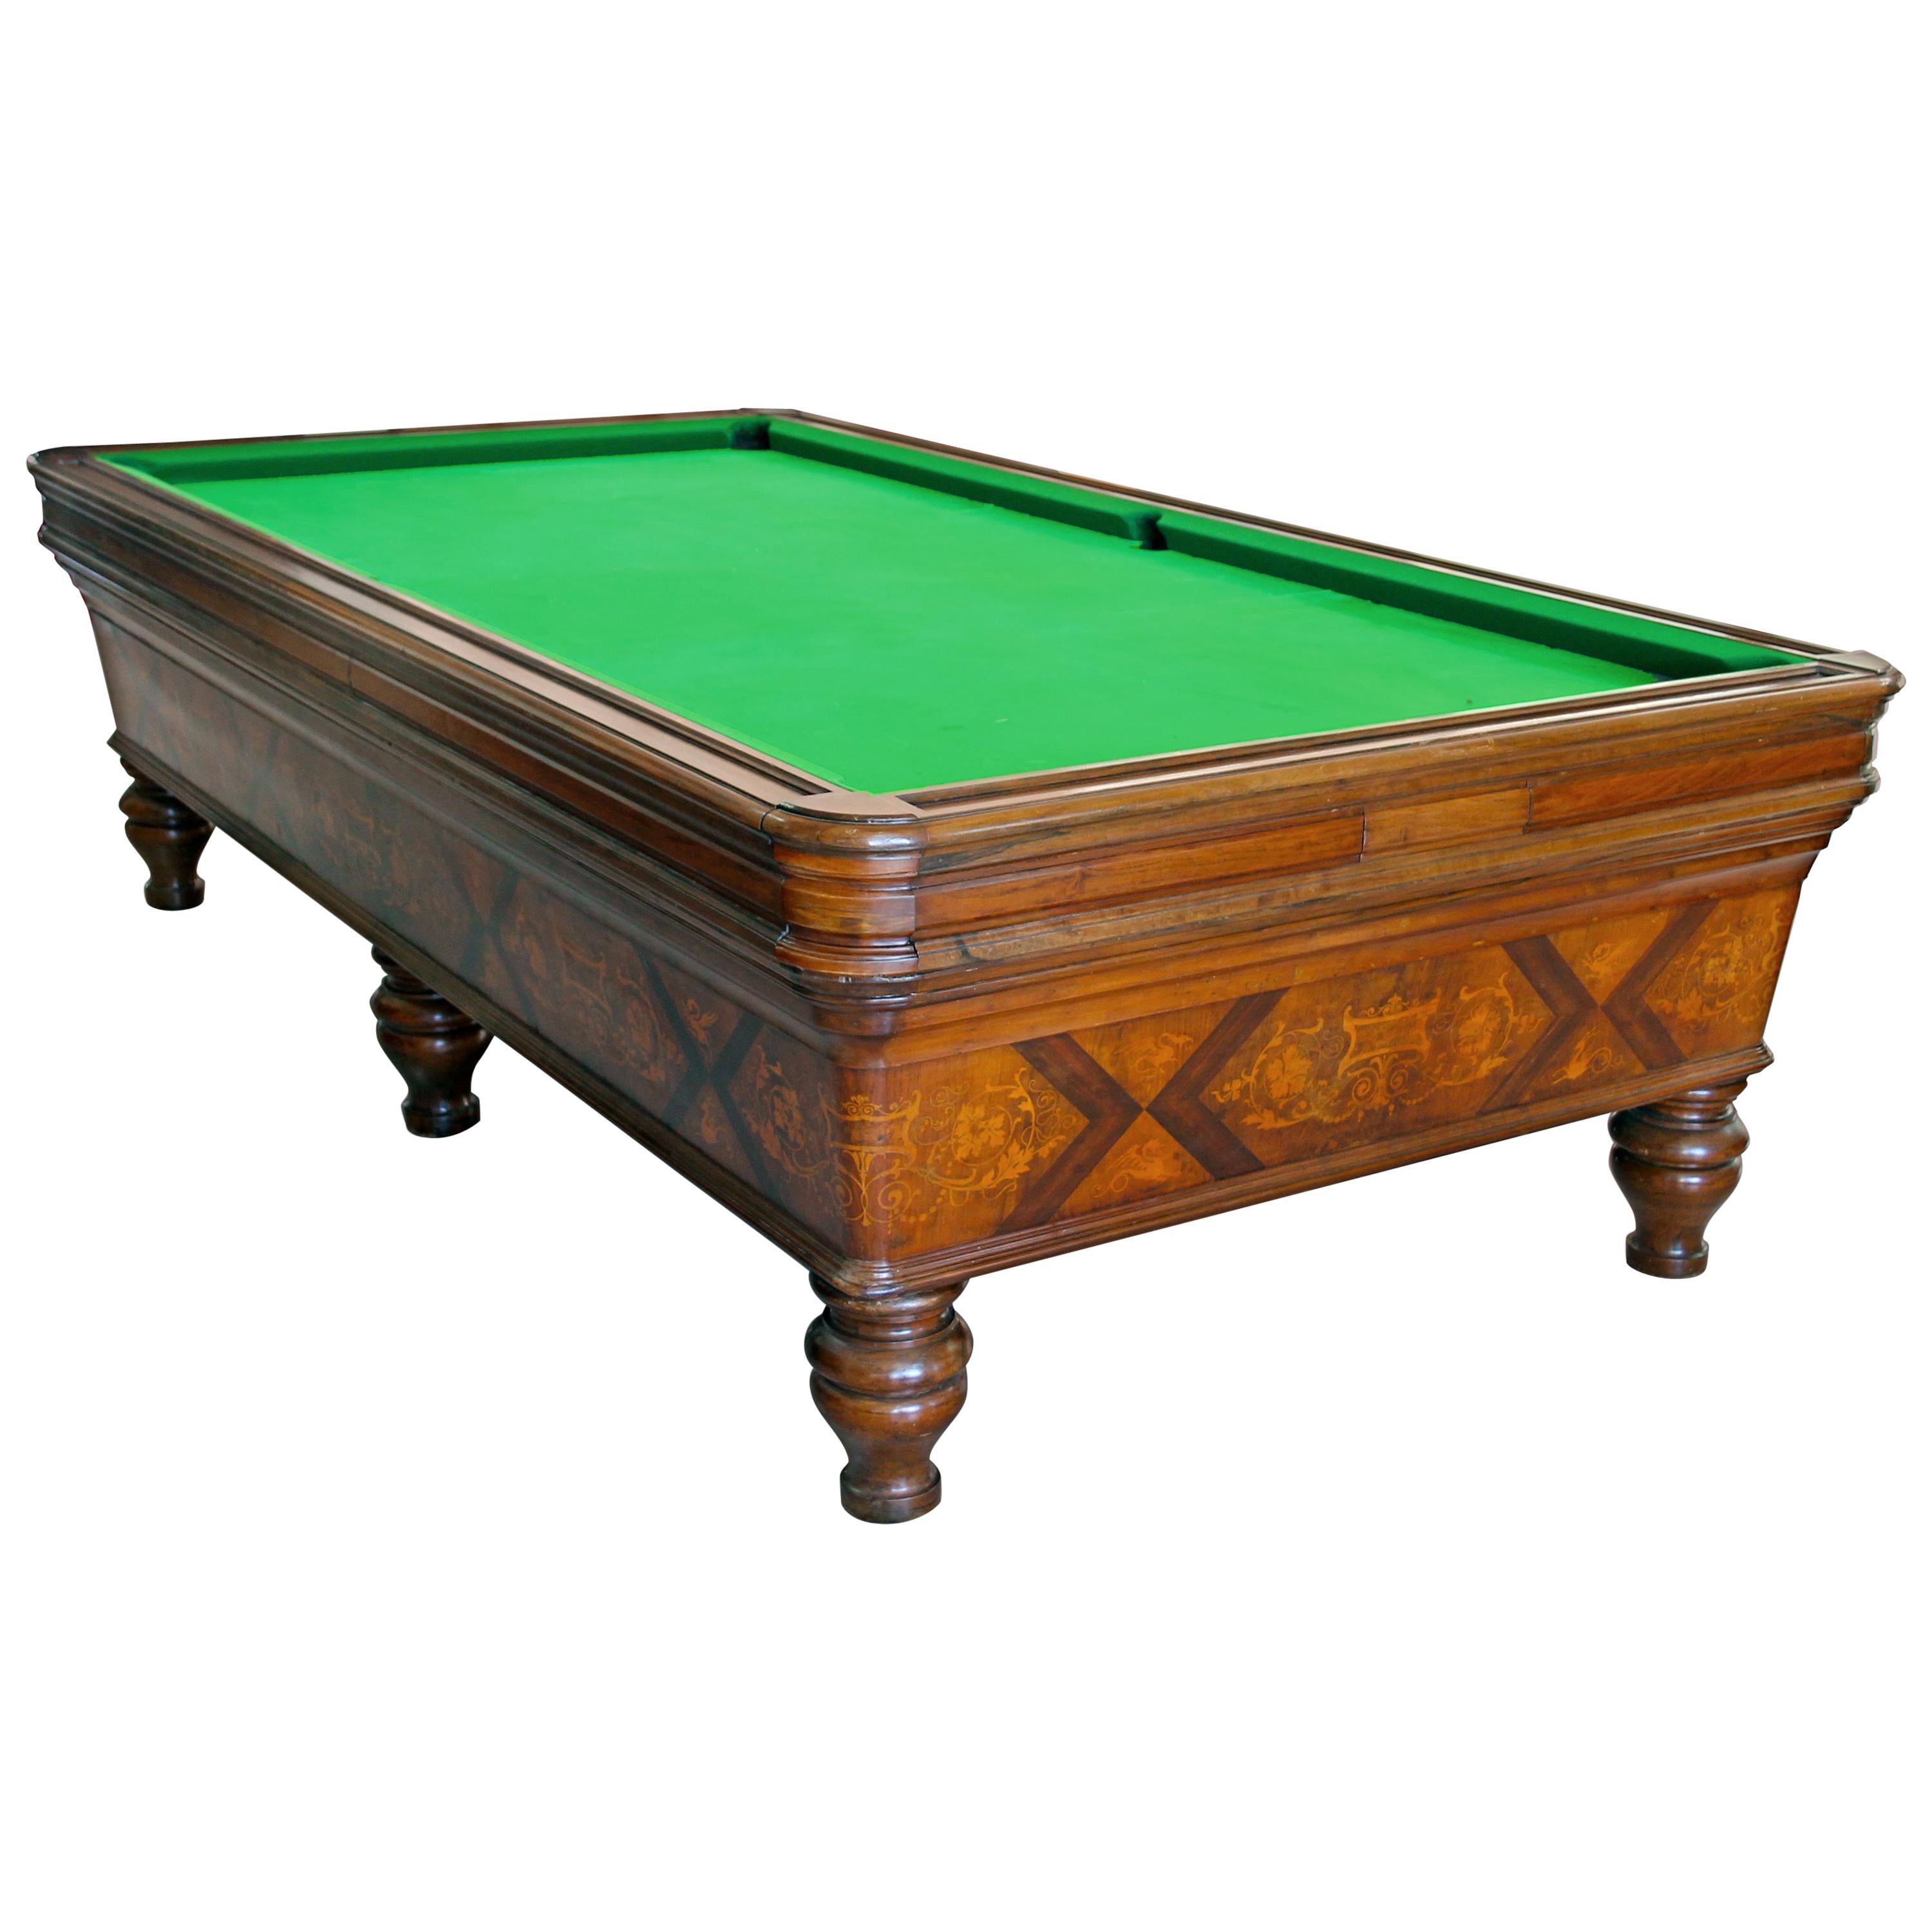 Historical Billiards Table Belonged to Gabriele D’Annunzio, Italy, 1820s